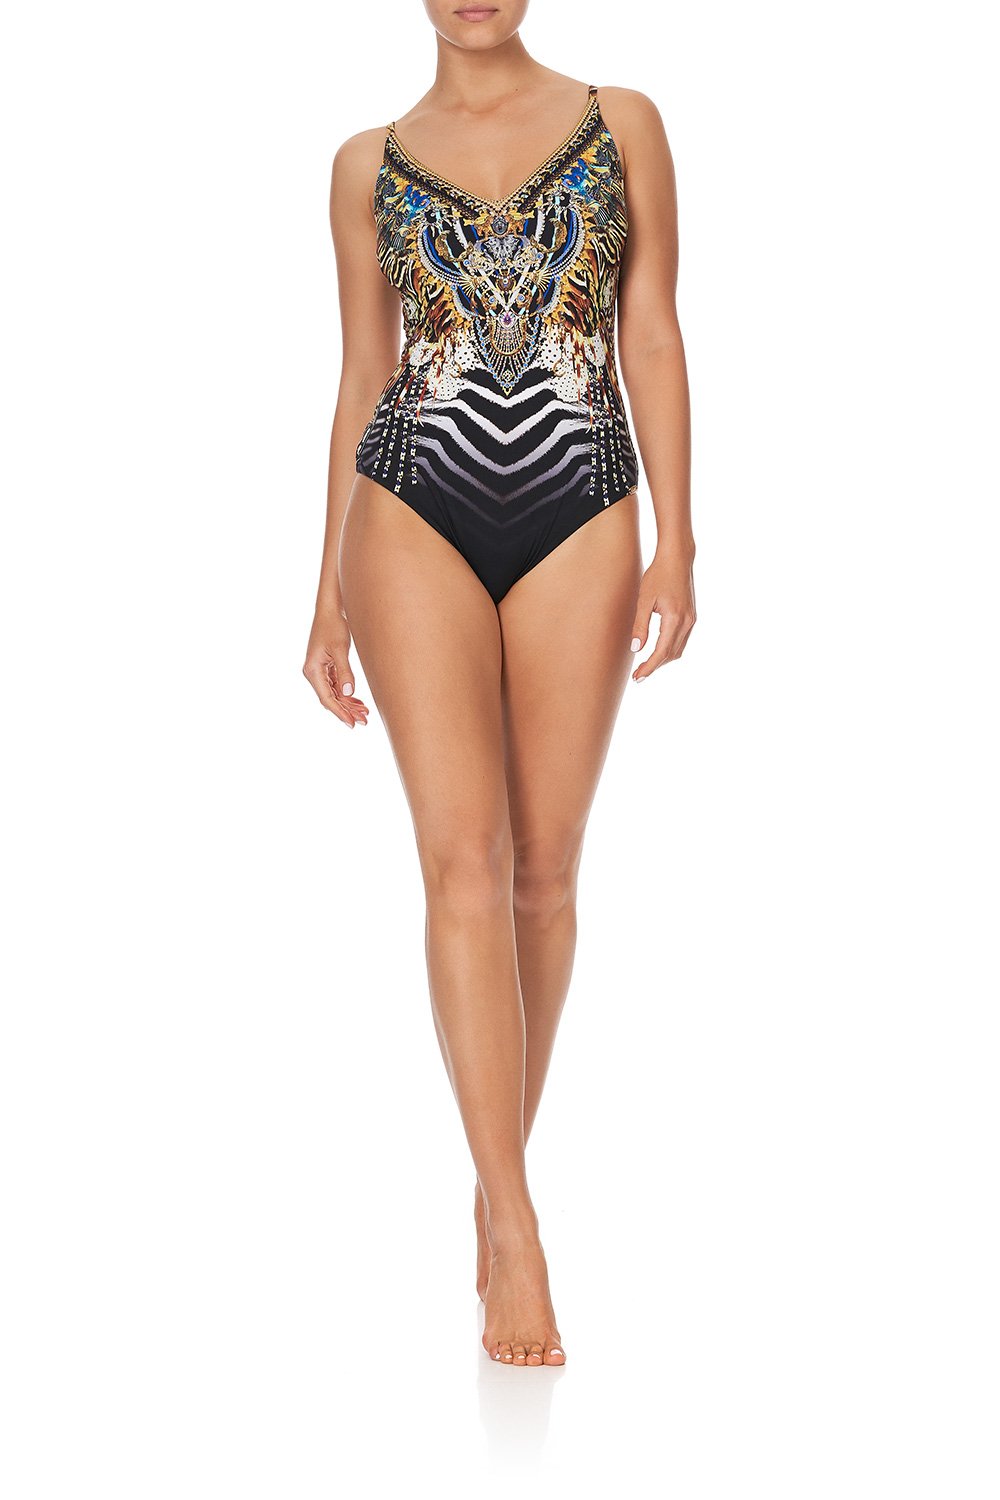 V NECK UNDERWIRE ONE PIECE LOST PARADISE